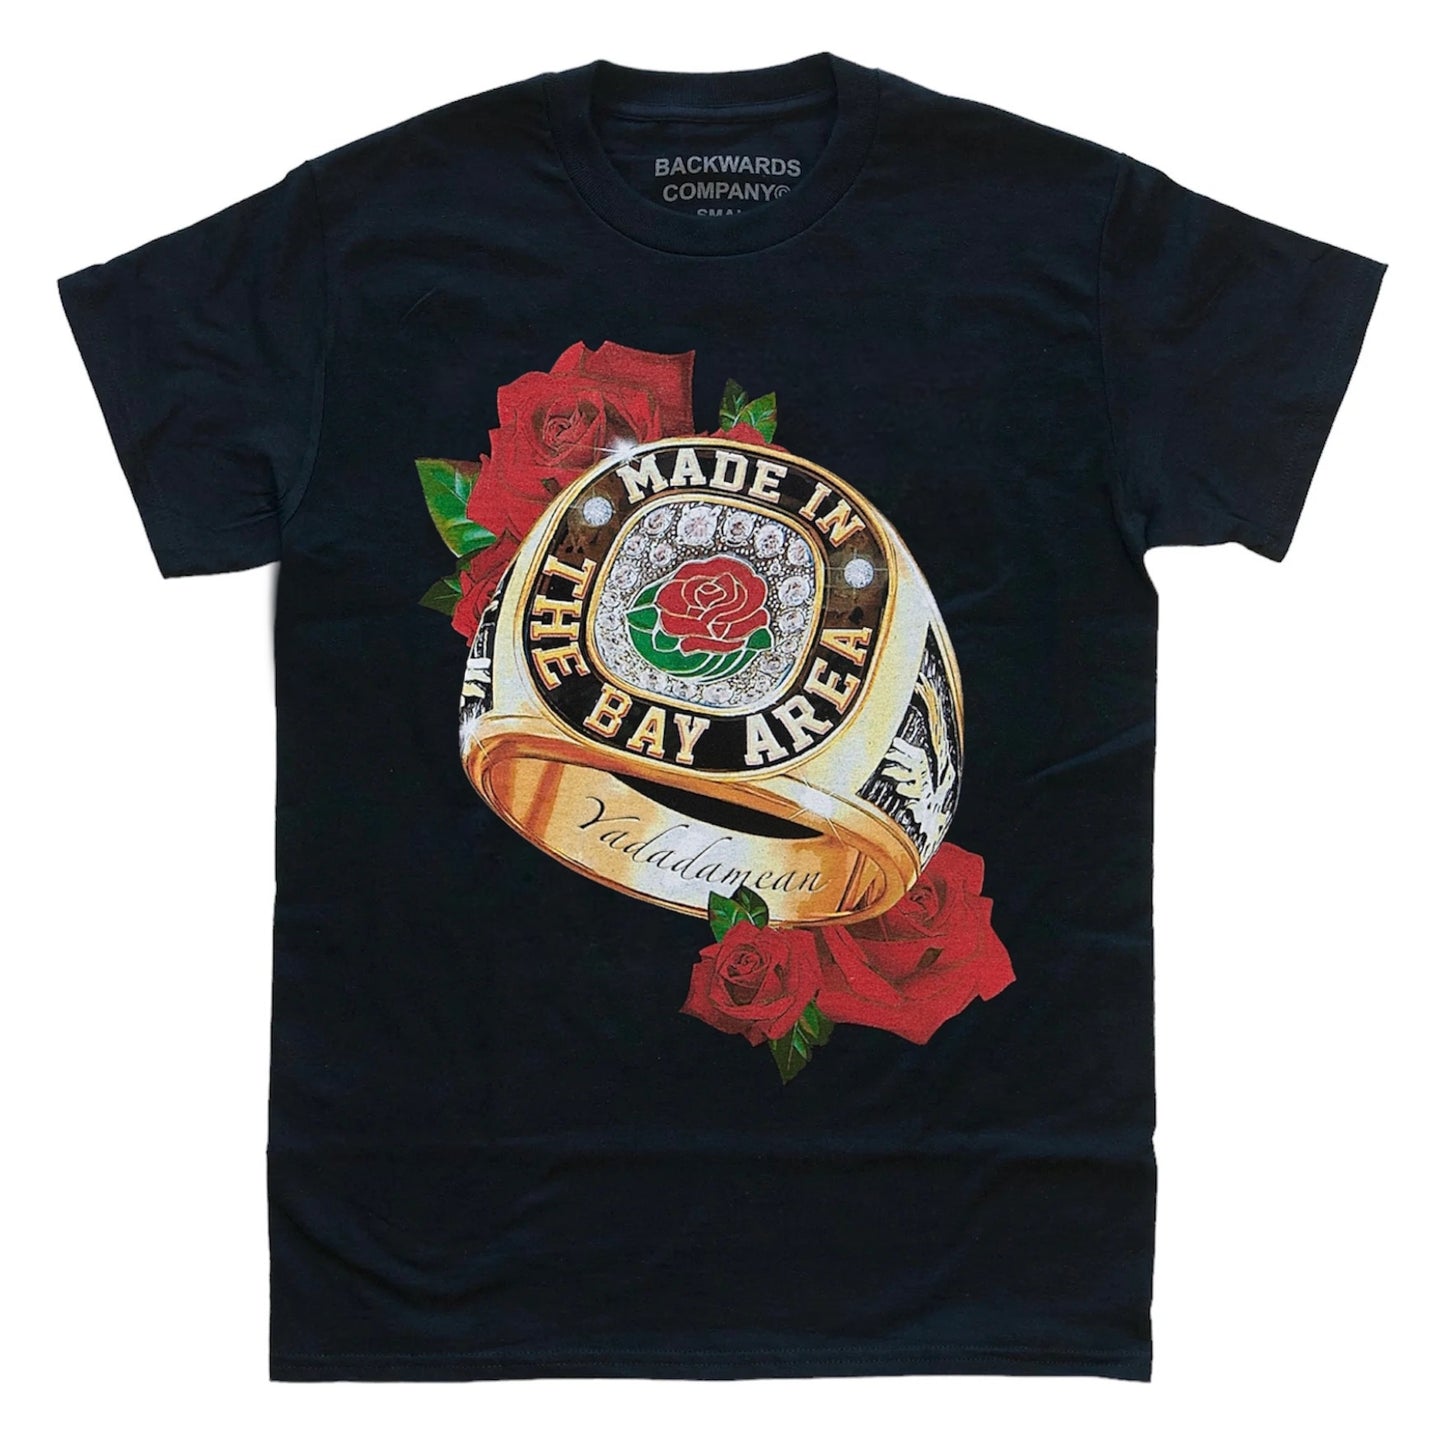 Black “Made In The Bay Area” T-Shirt